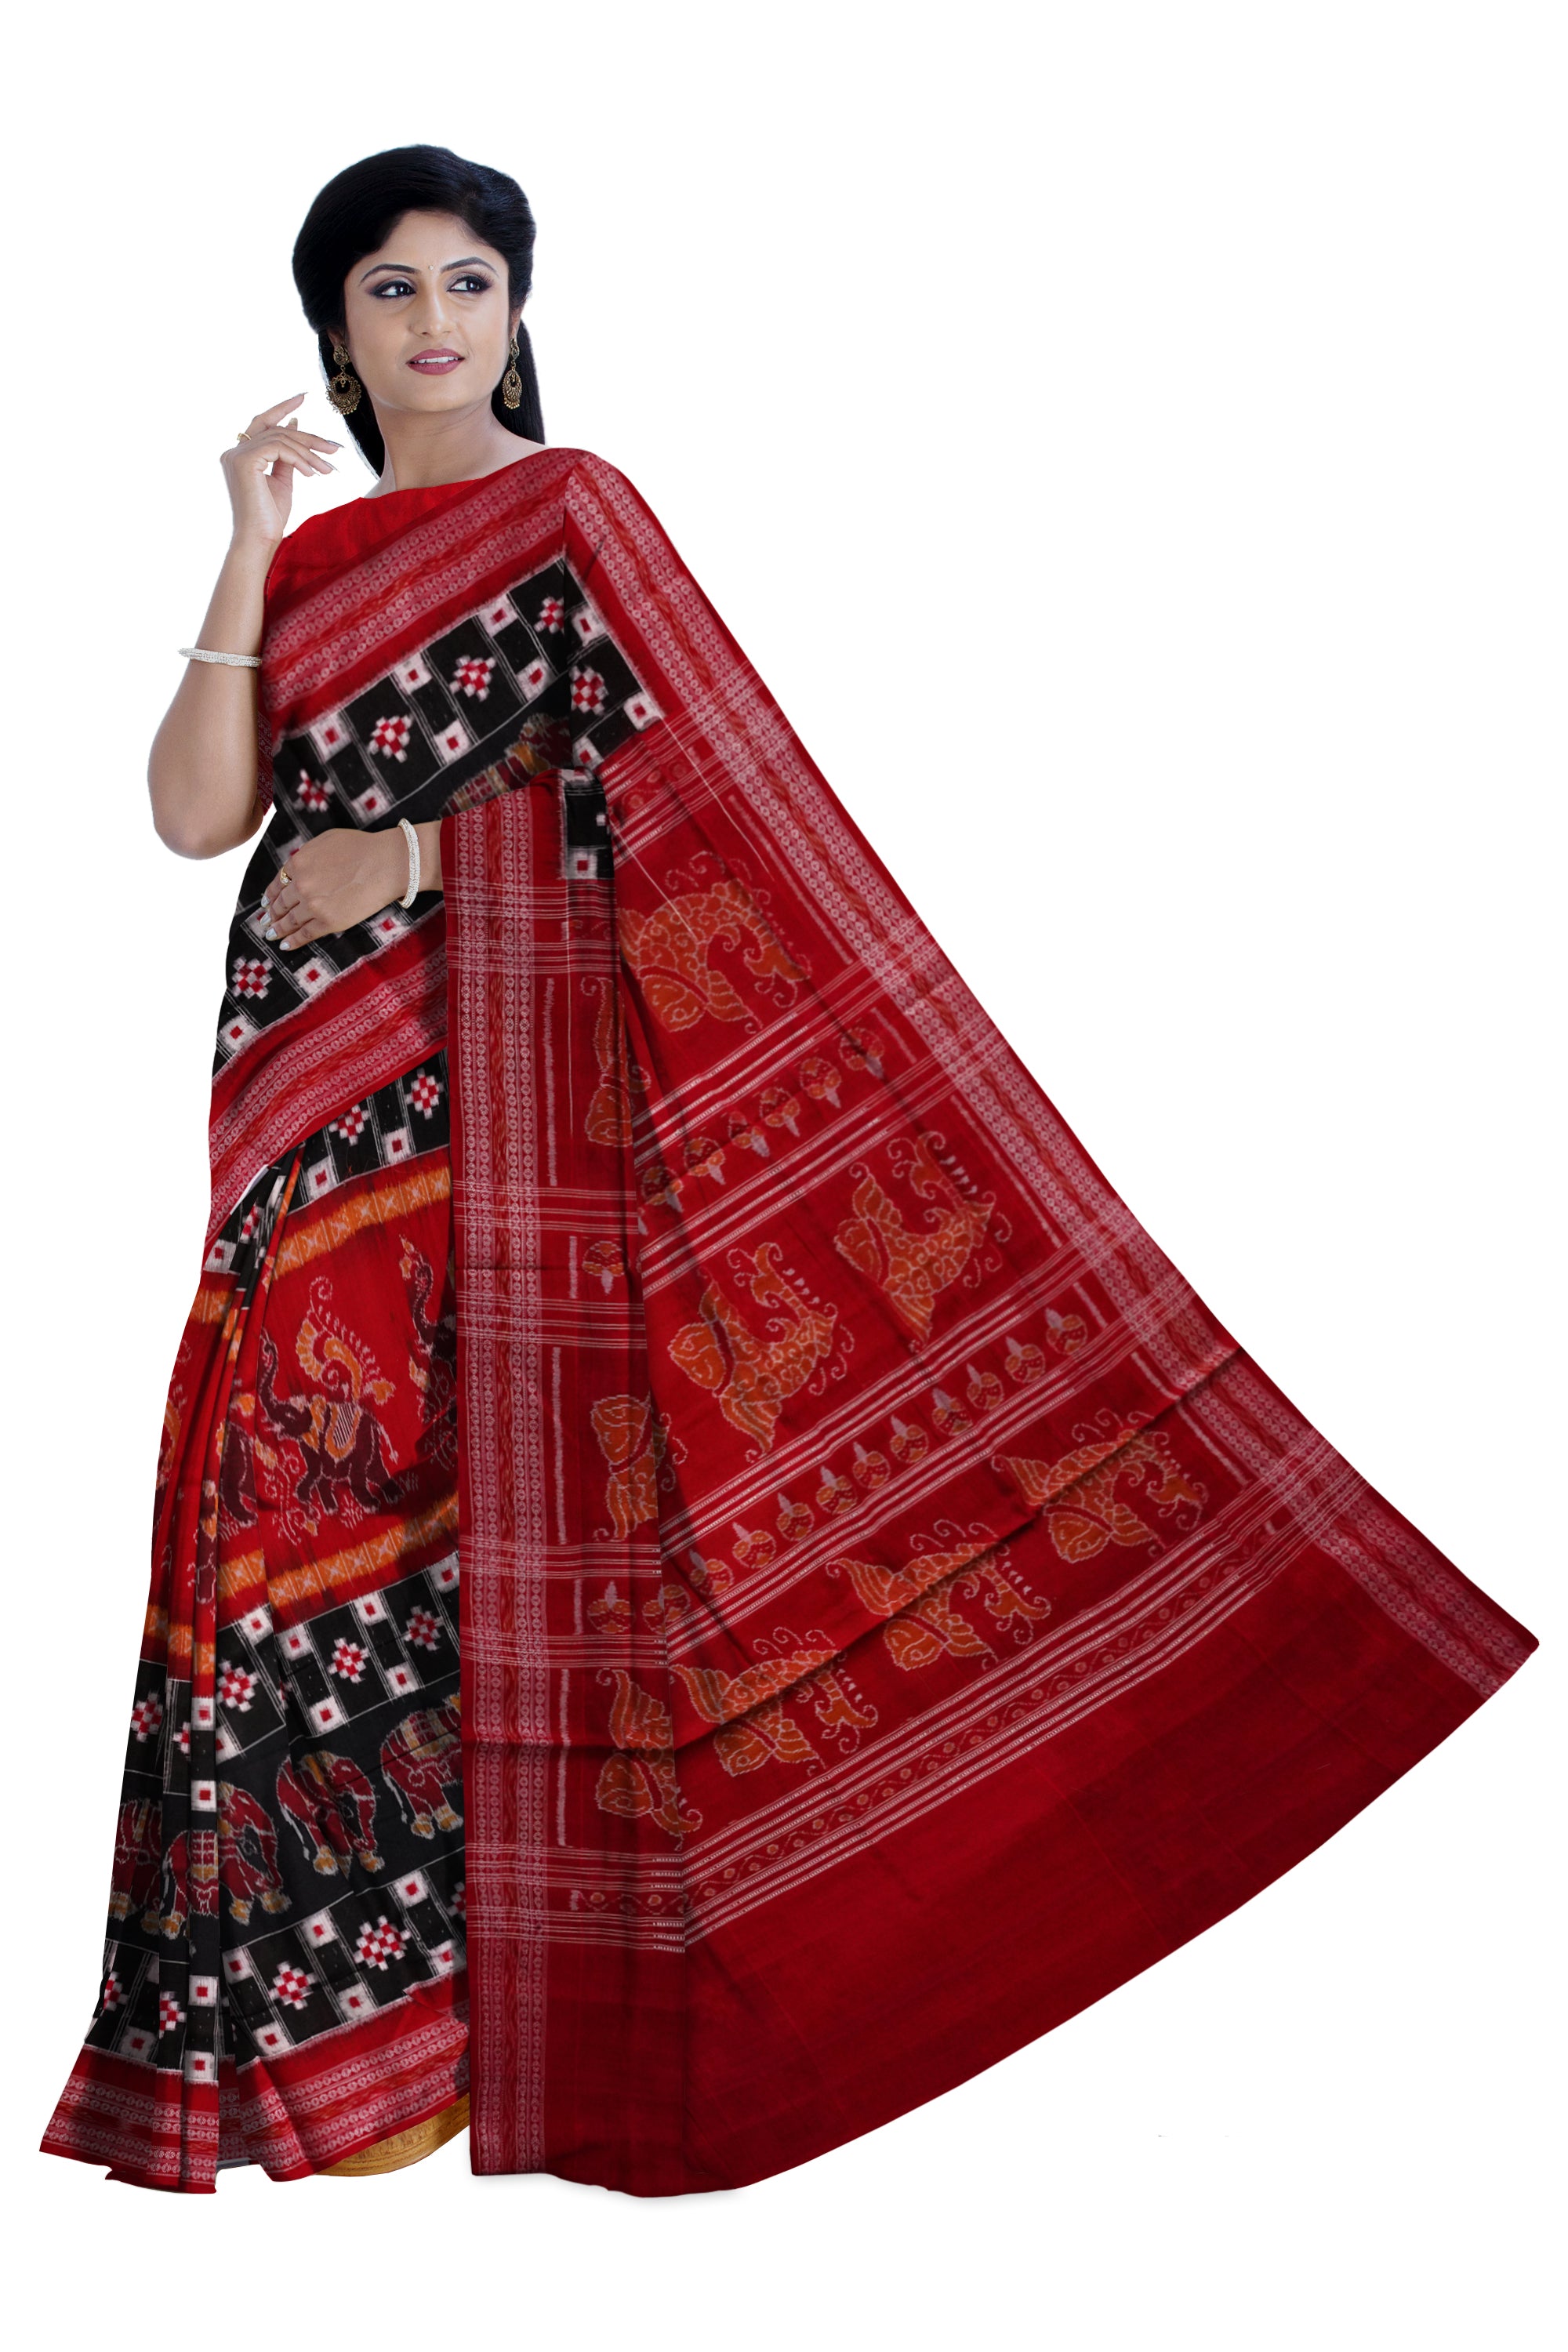 Elephant and Pasapali design in full body pure cotton saree in Black and Red color. - Koshali Arts & Crafts Enterprise